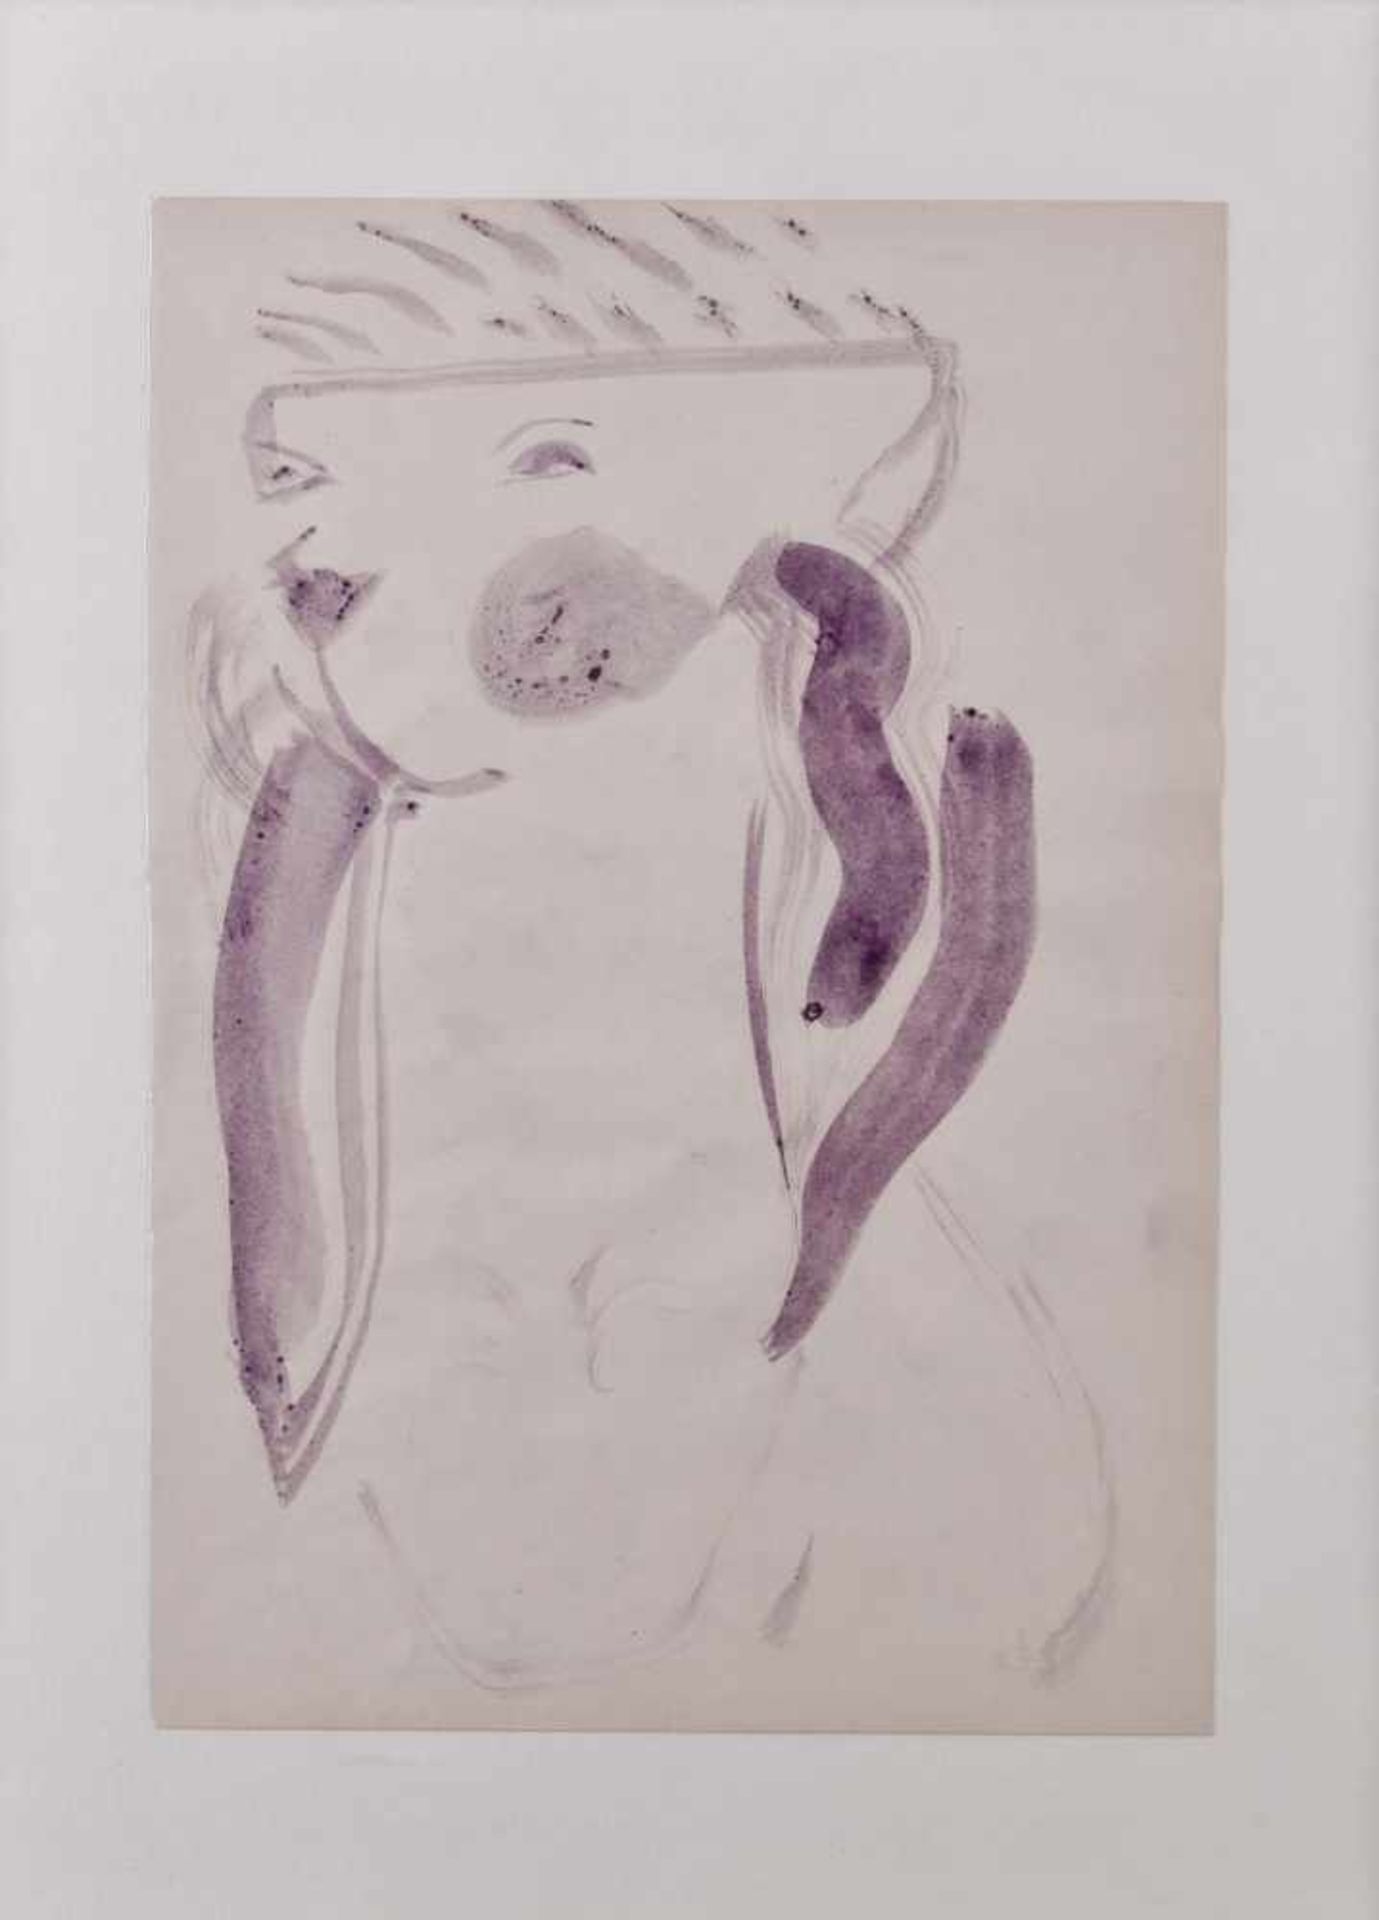 Wilhelm LACHNIT (1899-1962)"Figur"drawing - ink, 30 cm x 20.8 cm,to be paid by the buyer 2% resale